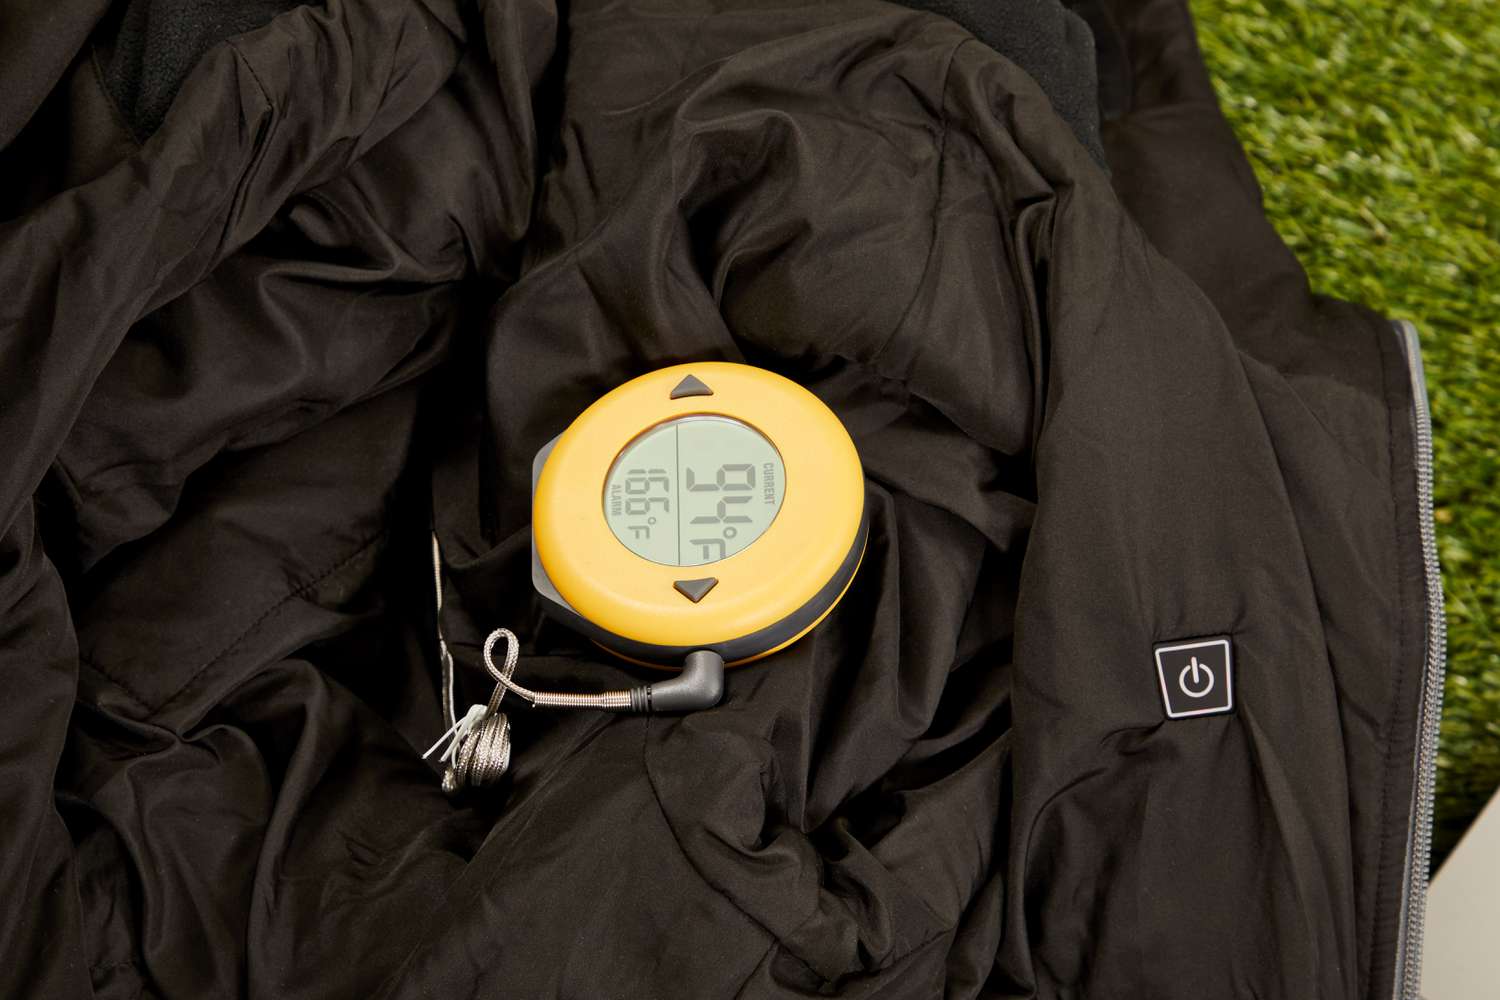 Thermometer showing a reading of 94 degrees F from a Conqueco Women's Slim-fit Heated Jacket